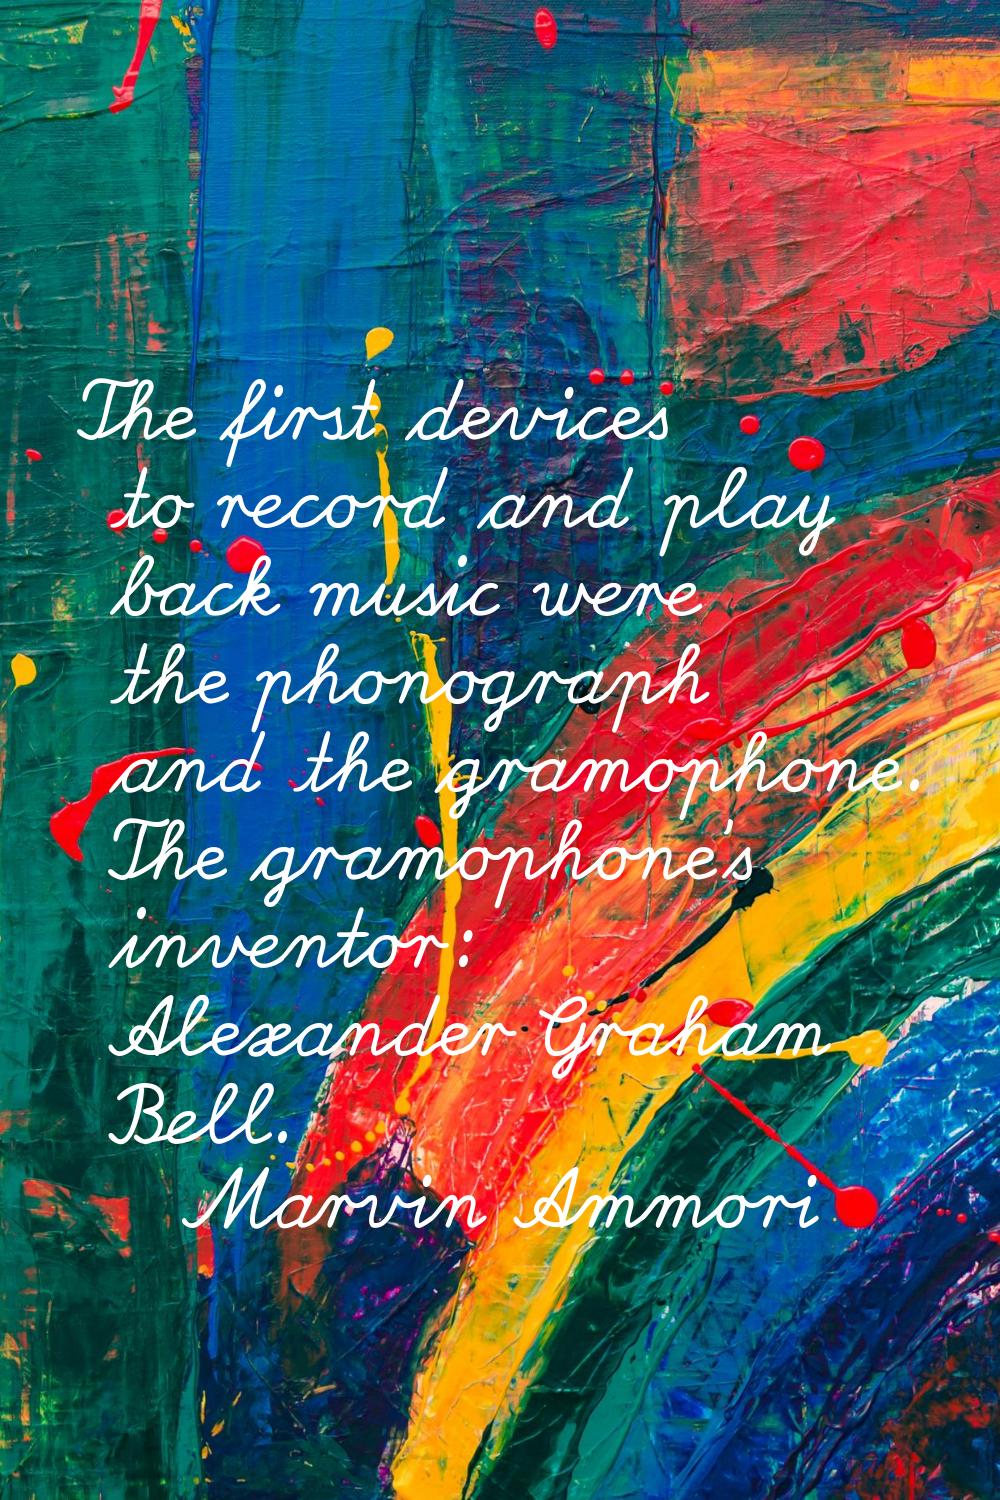 The first devices to record and play back music were the phonograph and the gramophone. The gramoph